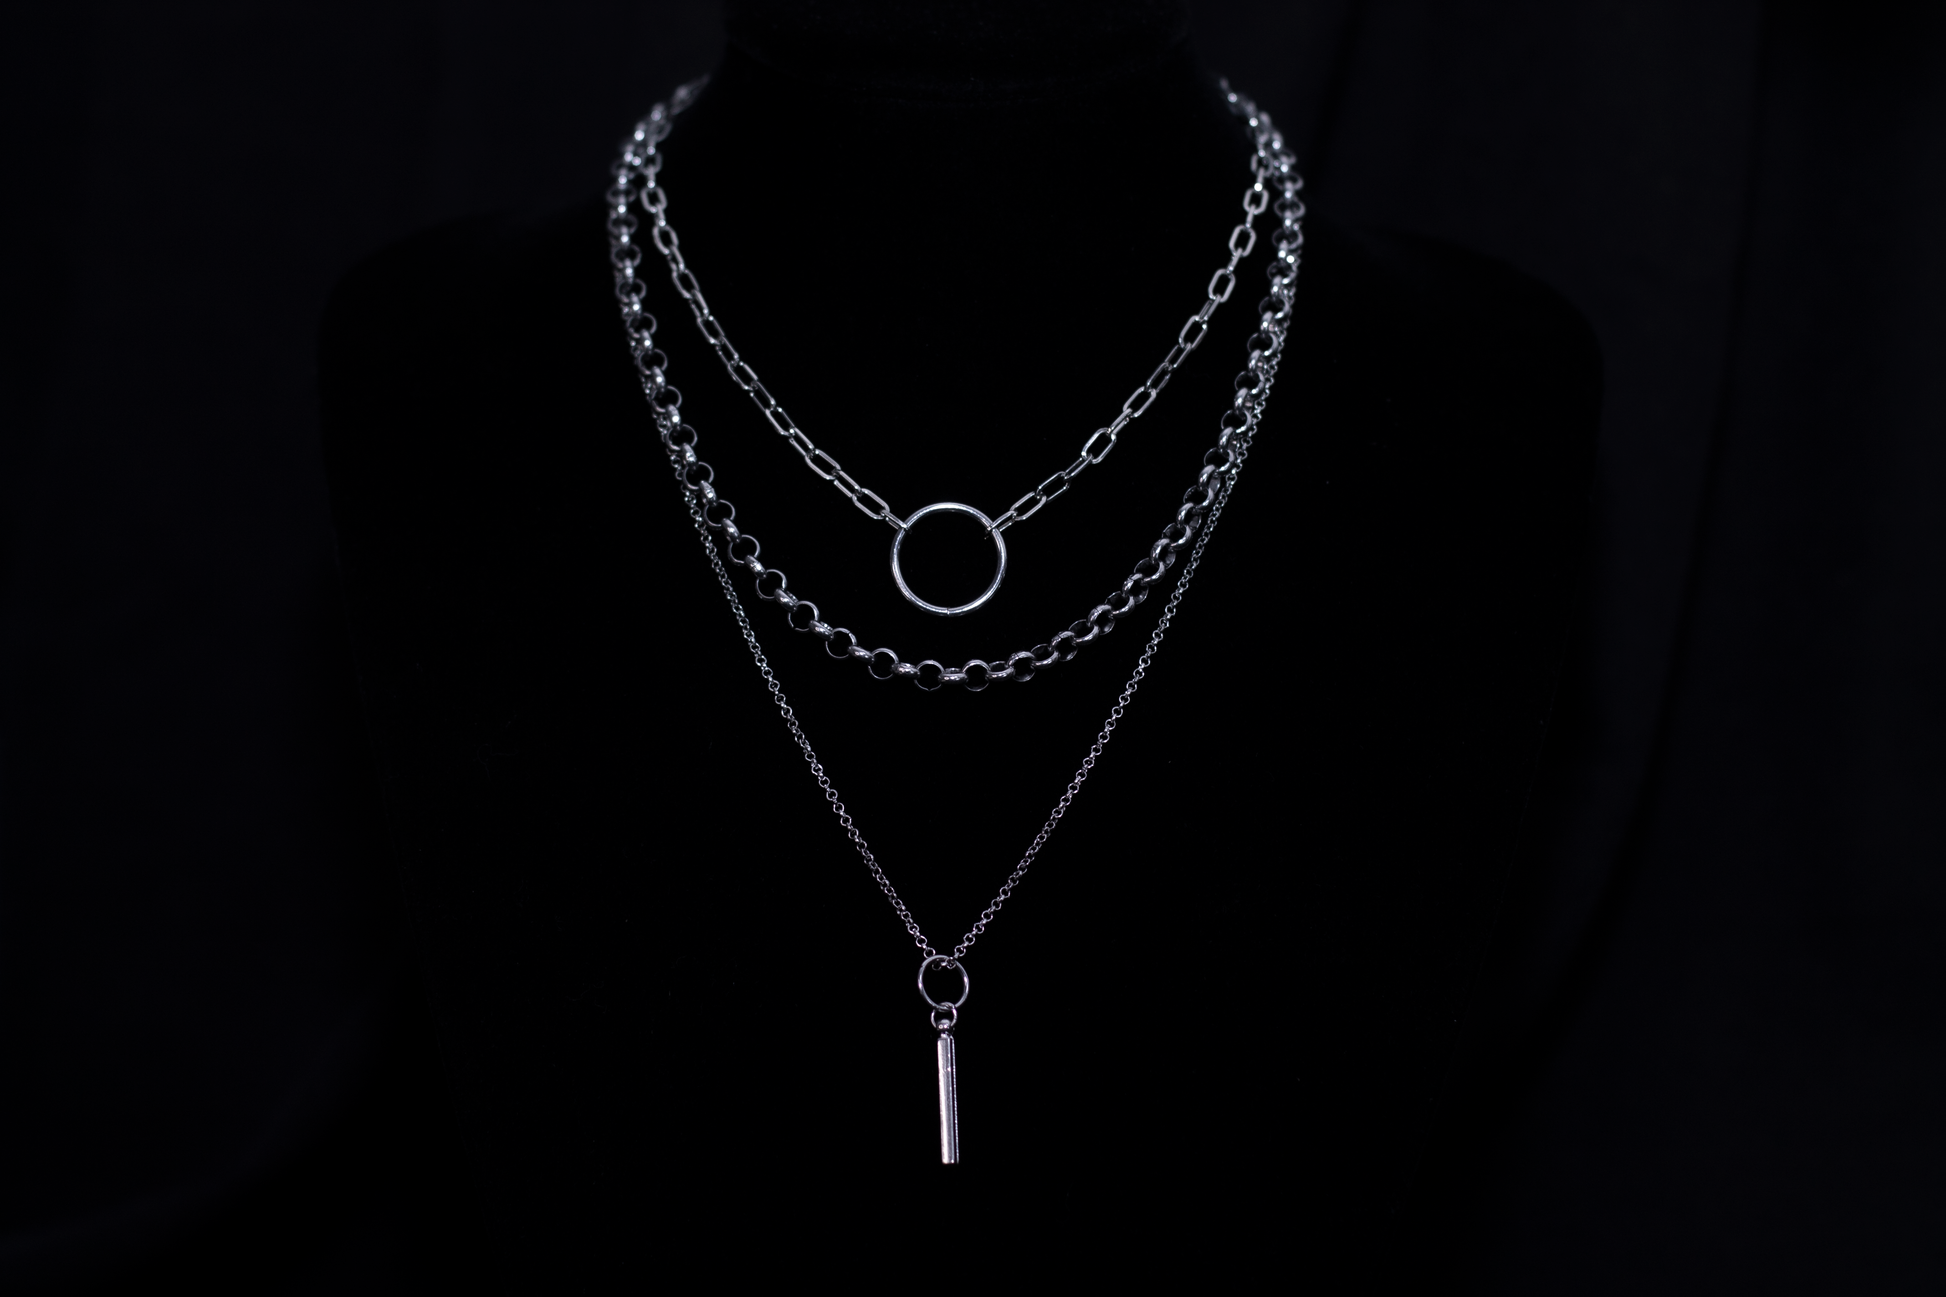 A striking Myril Jewels punk multi-chain necklace set against a black backdrop, featuring layered chains and a central hoop, epitomizing the bold, dark-avantgarde style of neo-goth fashion.